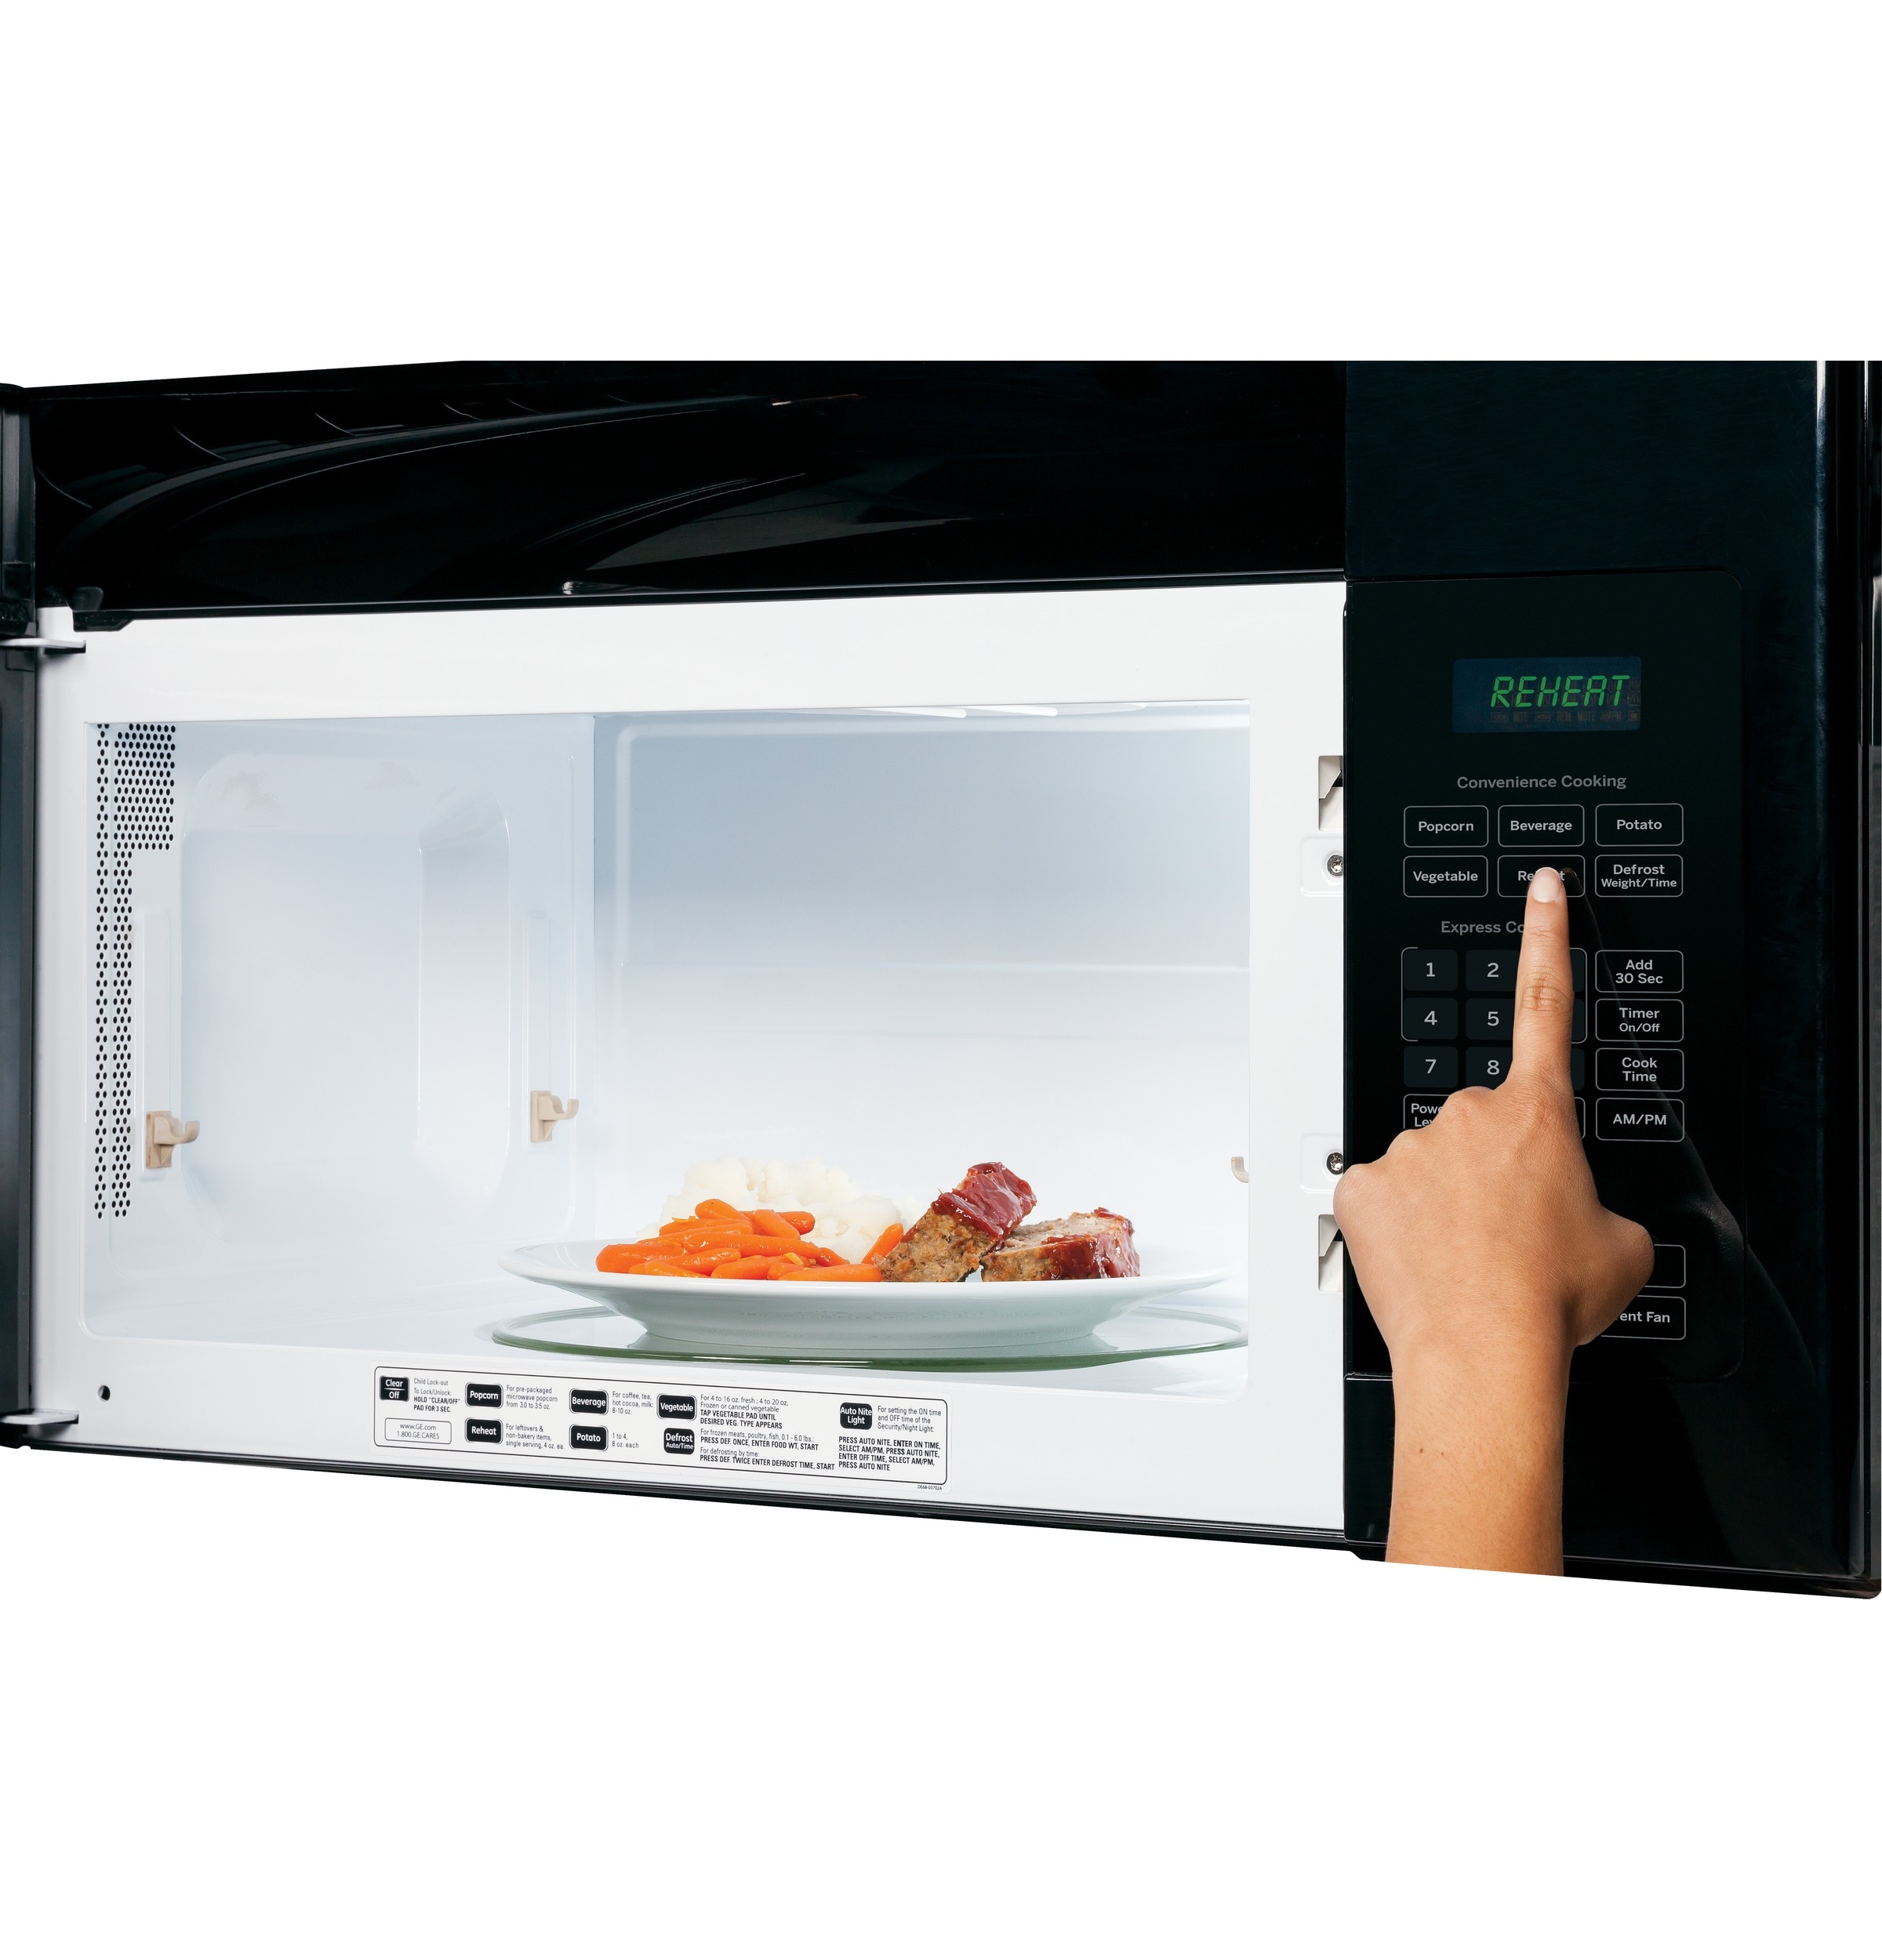 GE 0.7 cu. ft. Small Countertop Microwave in Stainless Steel JES1072SHSS -  The Home Depot